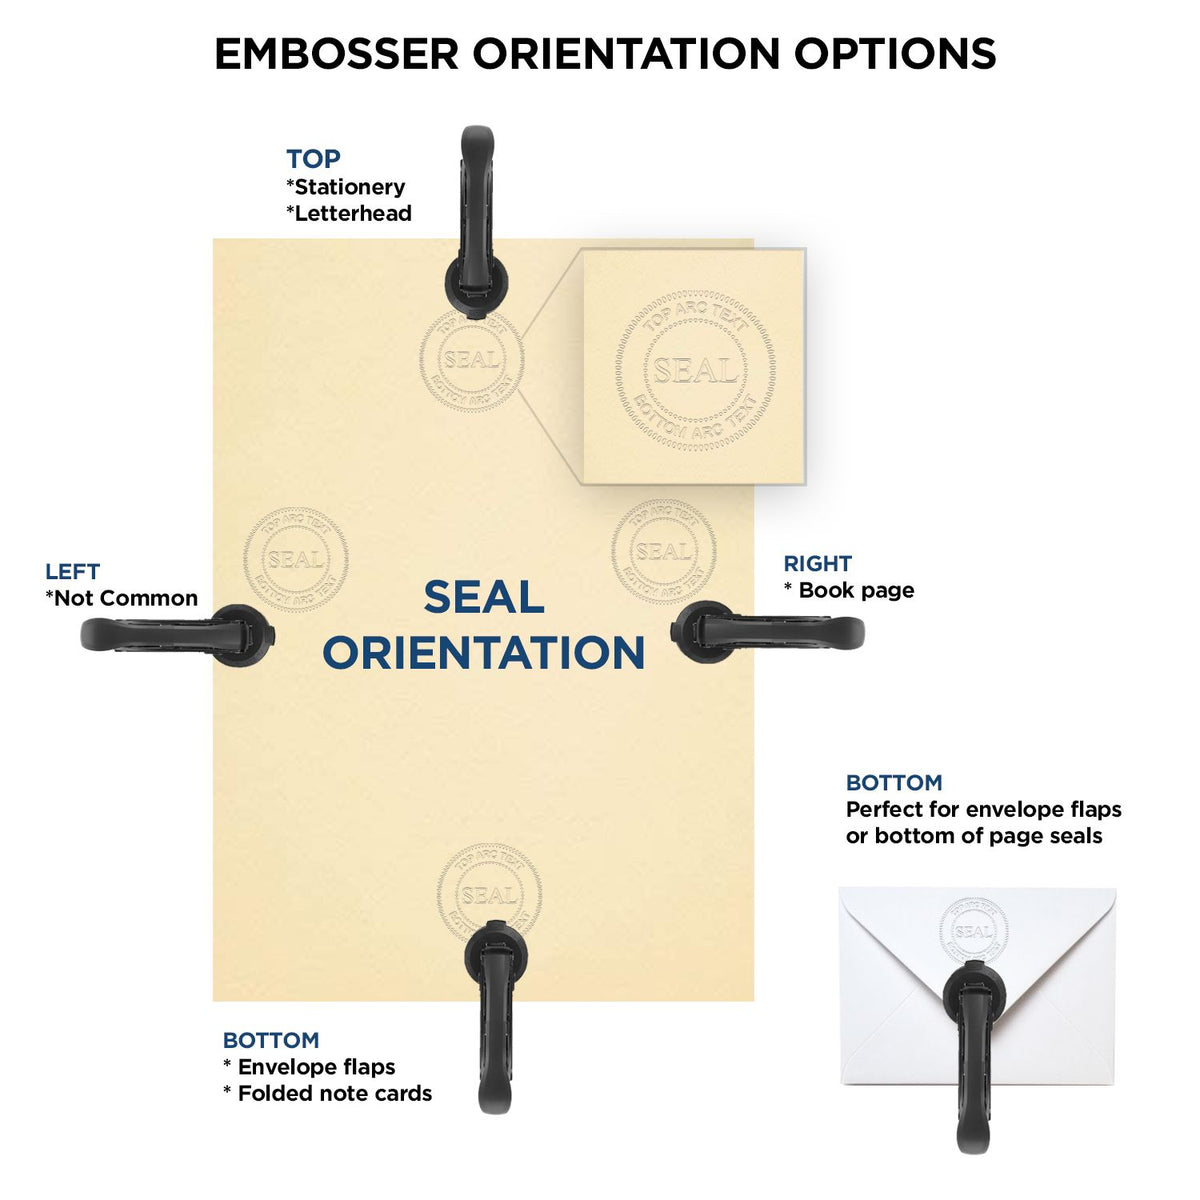 An infographic for the Handheld Texas Architect Seal Embosser showing embosser orientation, this is showing examples of a top, bottom, right and left insert.